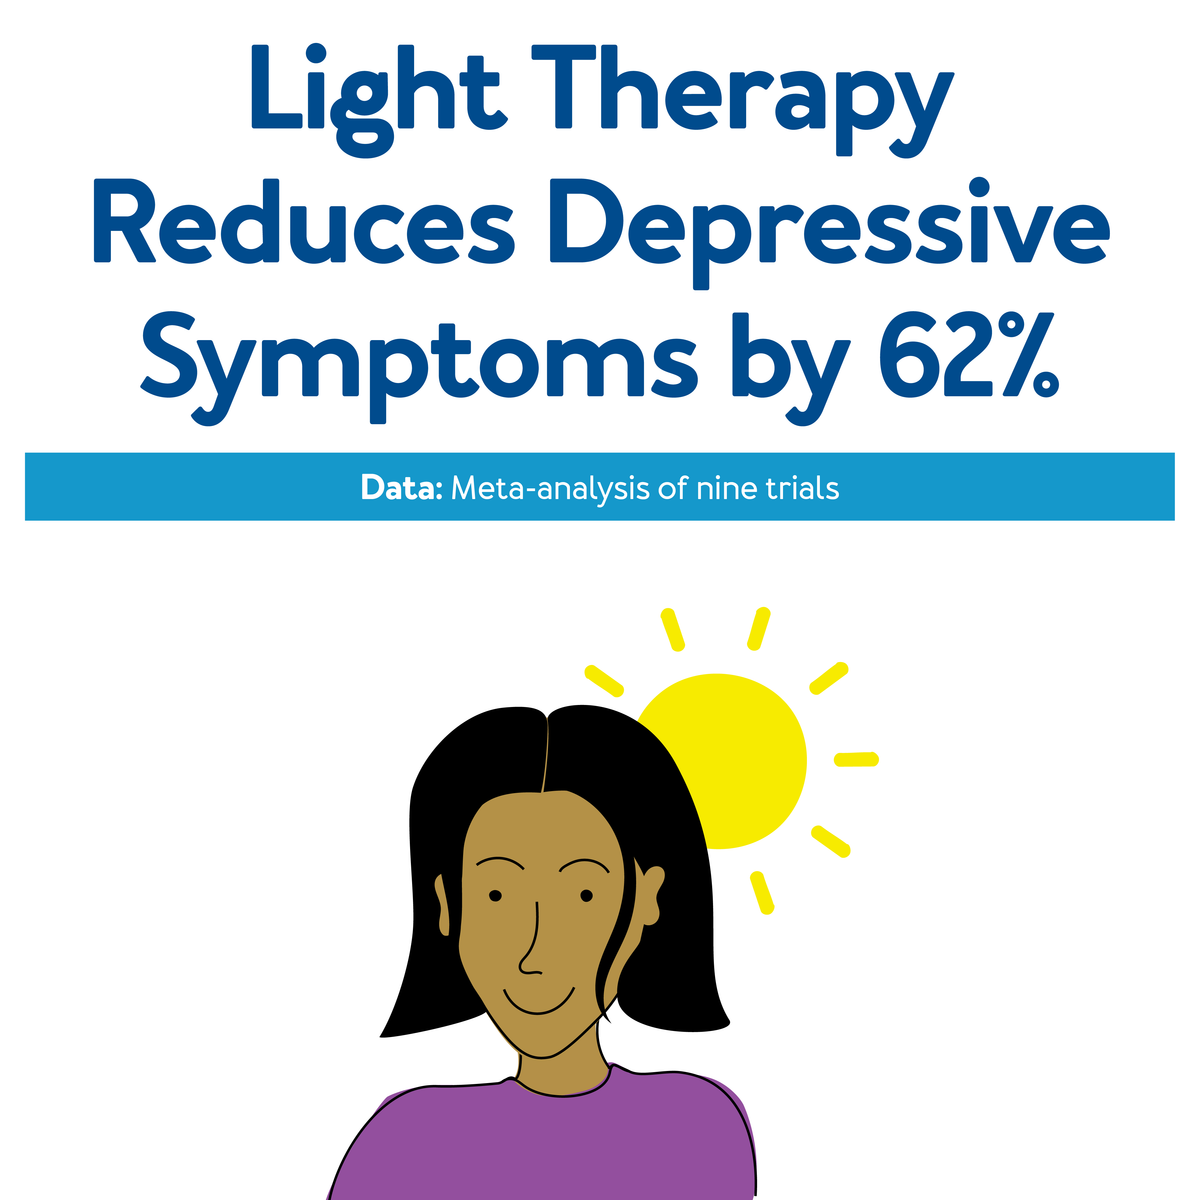 Light Therapy Reduces Depressive Symptoms by 62% - Data: Meta-analysis of nine trials - Light therapy reduced depressive symptoms by 62%